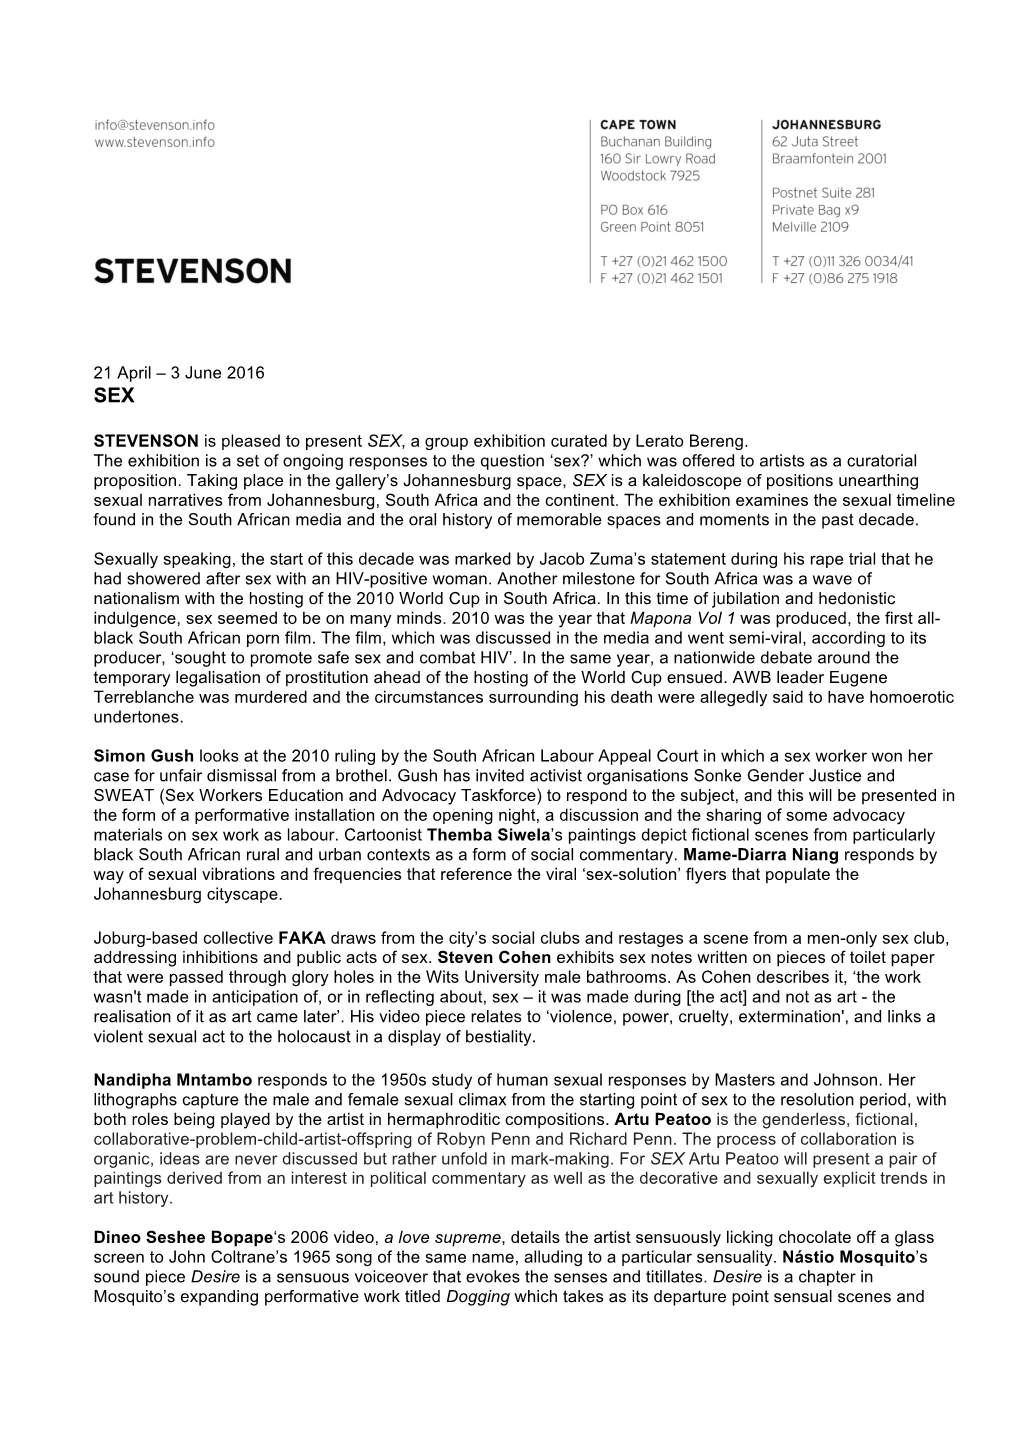 3 June 2016 STEVENSON Is Pleased to Present SEX, a Group